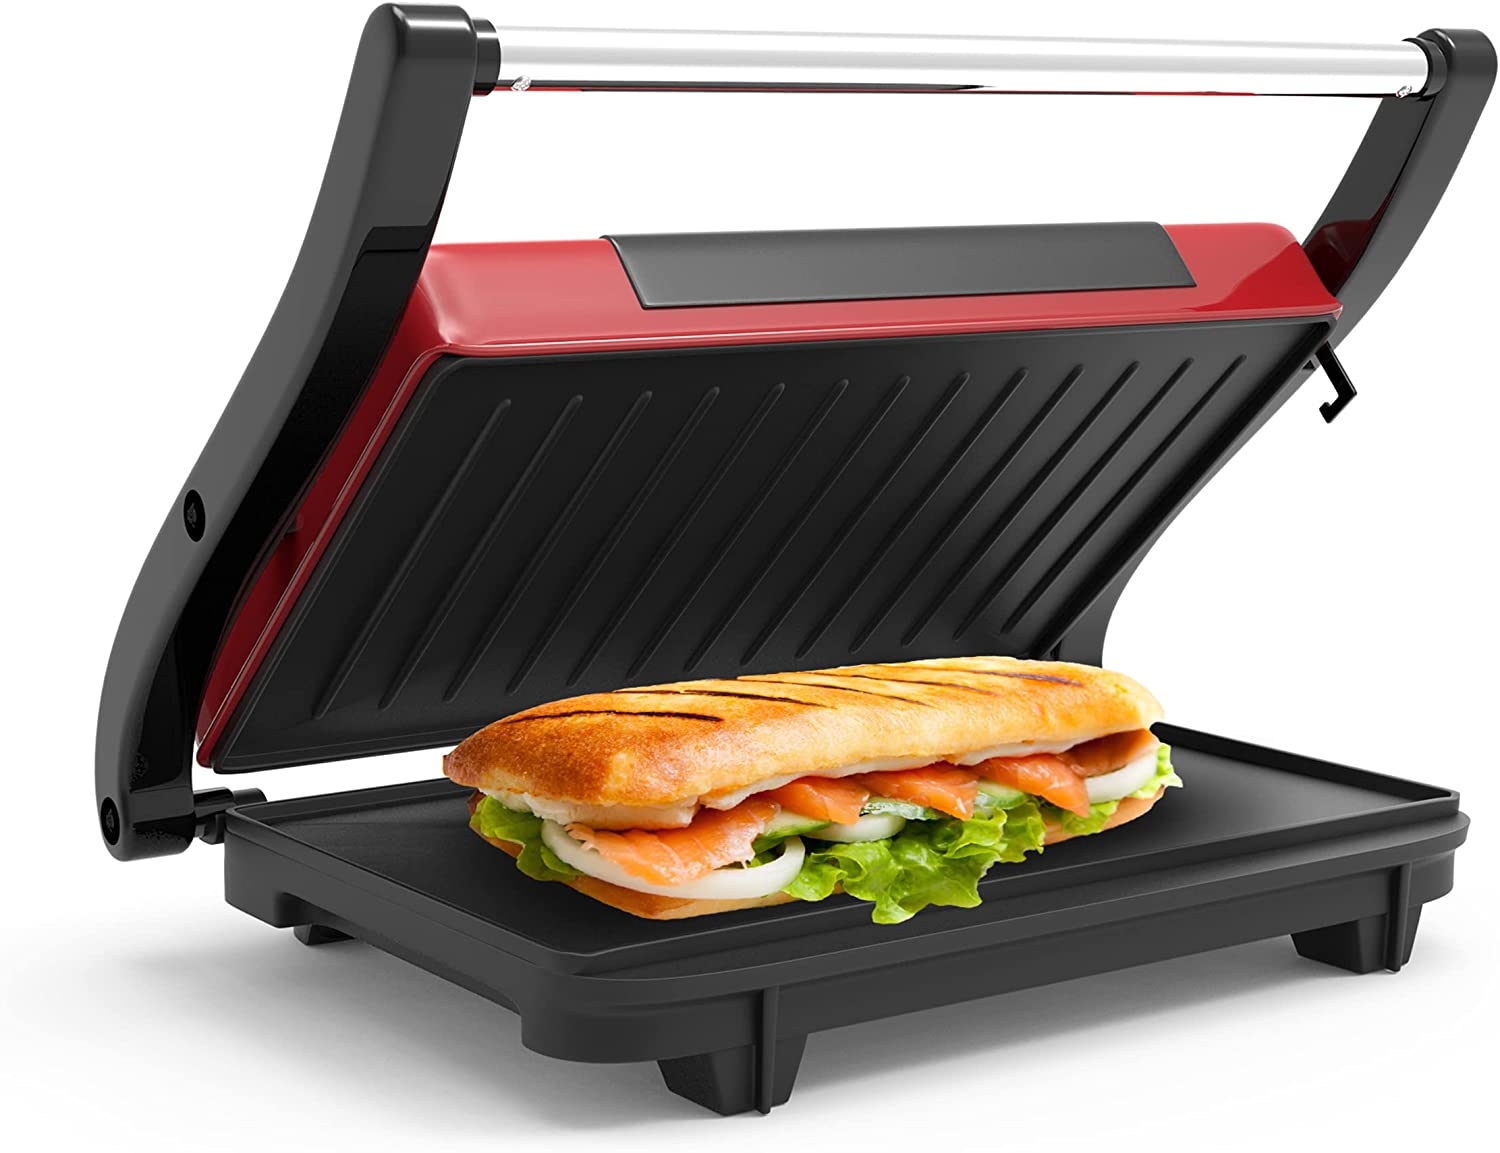 Chef Buddy Gourmet (Red) Panini Press – Sandwich Maker with Nonstick Plates – Indoor Countertop Cooking Burgers, Steak,